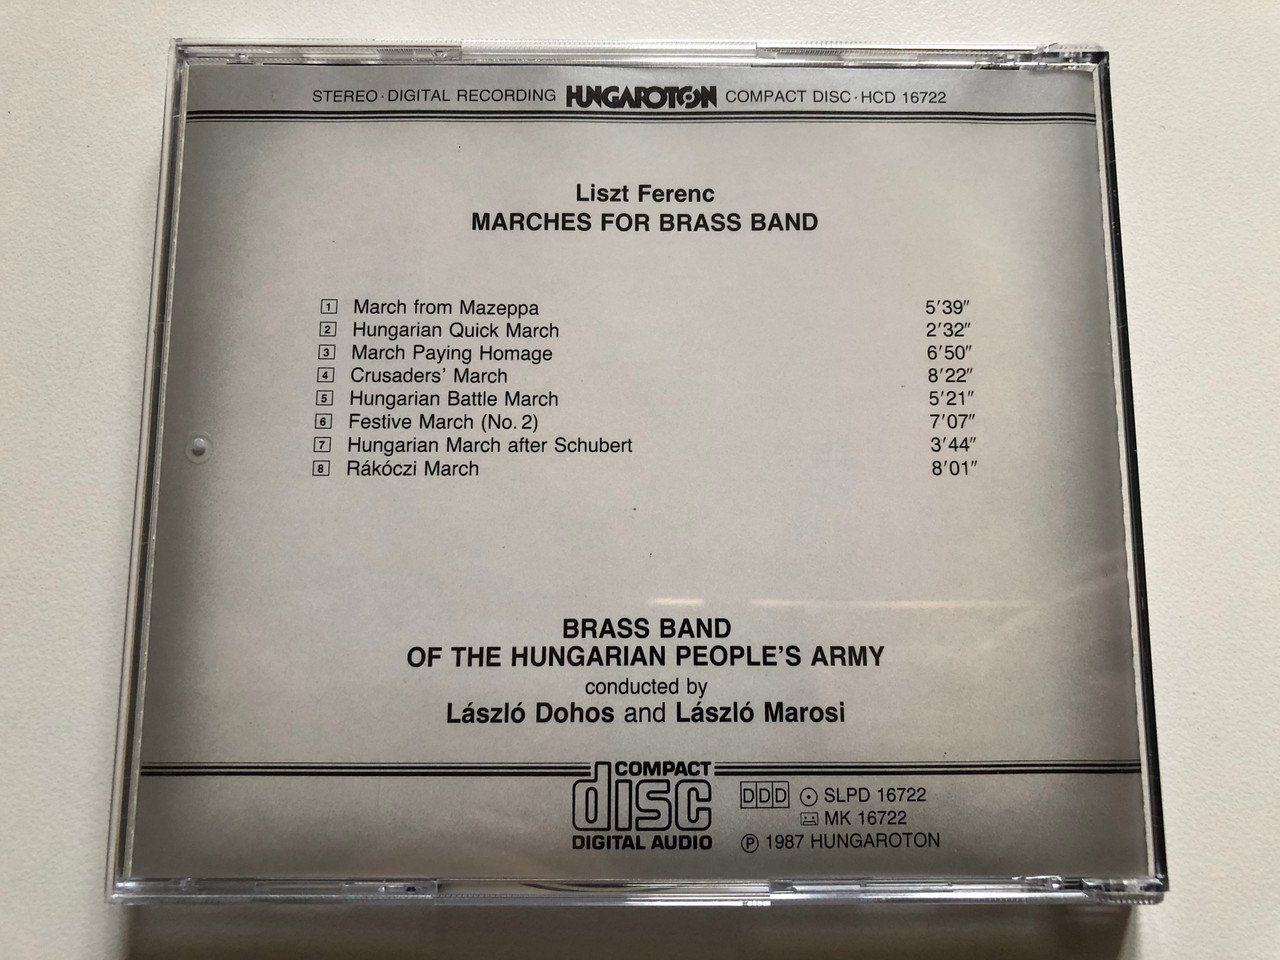 https://cdn10.bigcommerce.com/s-62bdpkt7pb/products/0/images/306190/Liszt_Ferenc_Marches_-_Brass_Band_Of_The_Hungarian_Peoples_Army_Laszlo_Dohos_Laszlo_Marosi_Hungaroton_Audio_CD_1987_Stereo_HCD_16722_4__17774.1698163012.1280.1280.JPG?c=2